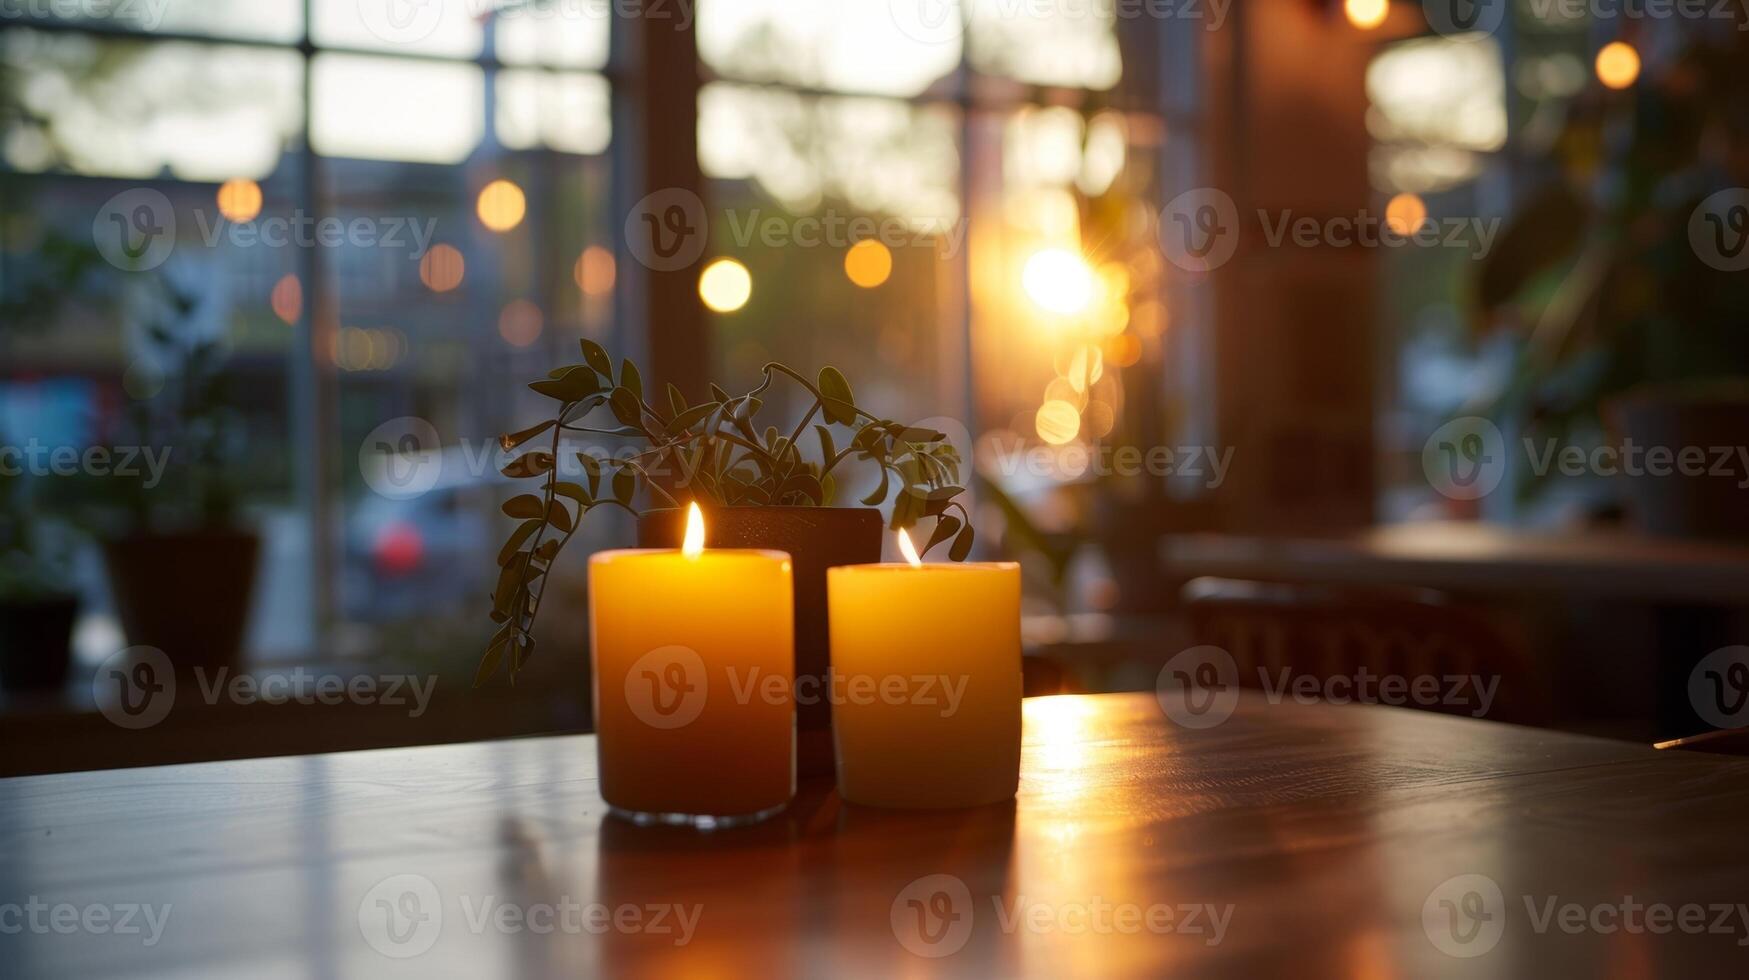 As the sun sets outside the candles in the studio become the main source of light creating a cozy and intimate atmosphere. 2d flat cartoon photo